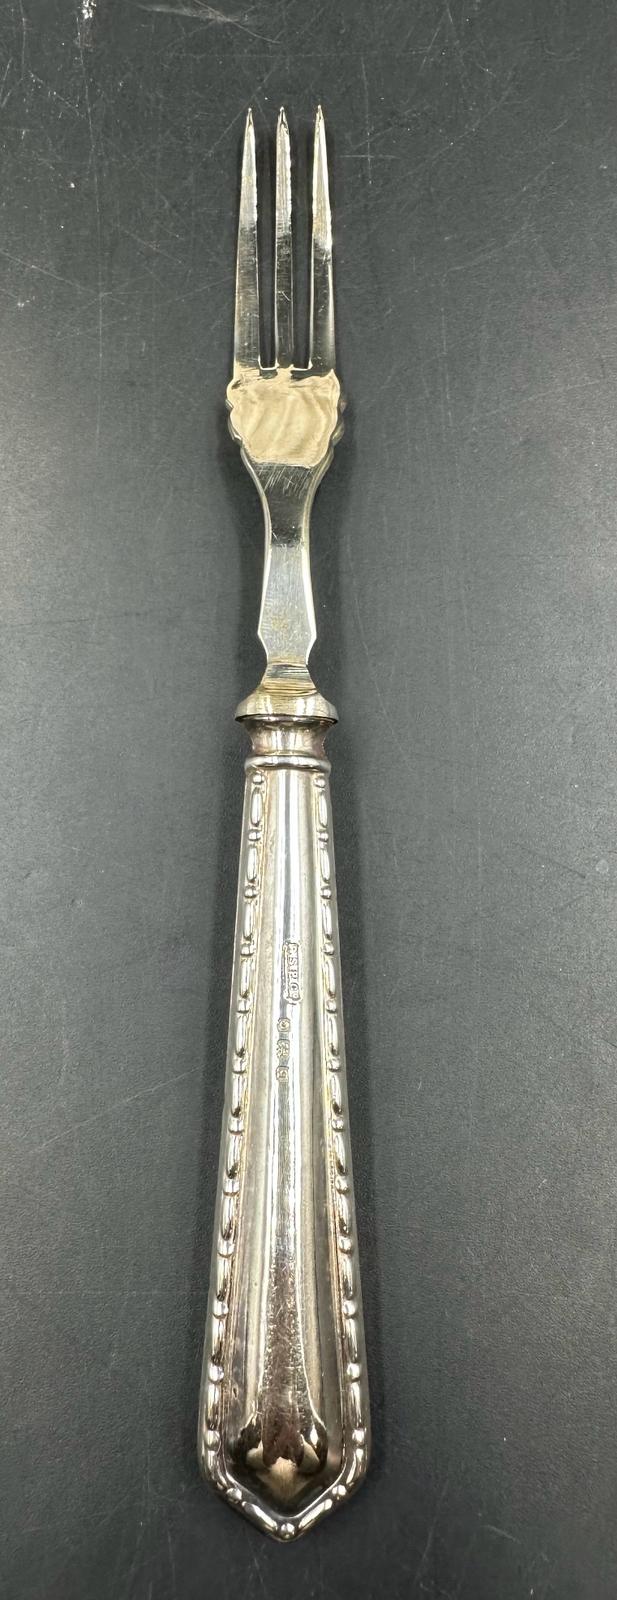 A cased set of six dessert forks and knives with silver handles by Raeno Silver Plate Co Ltd, - Image 5 of 5